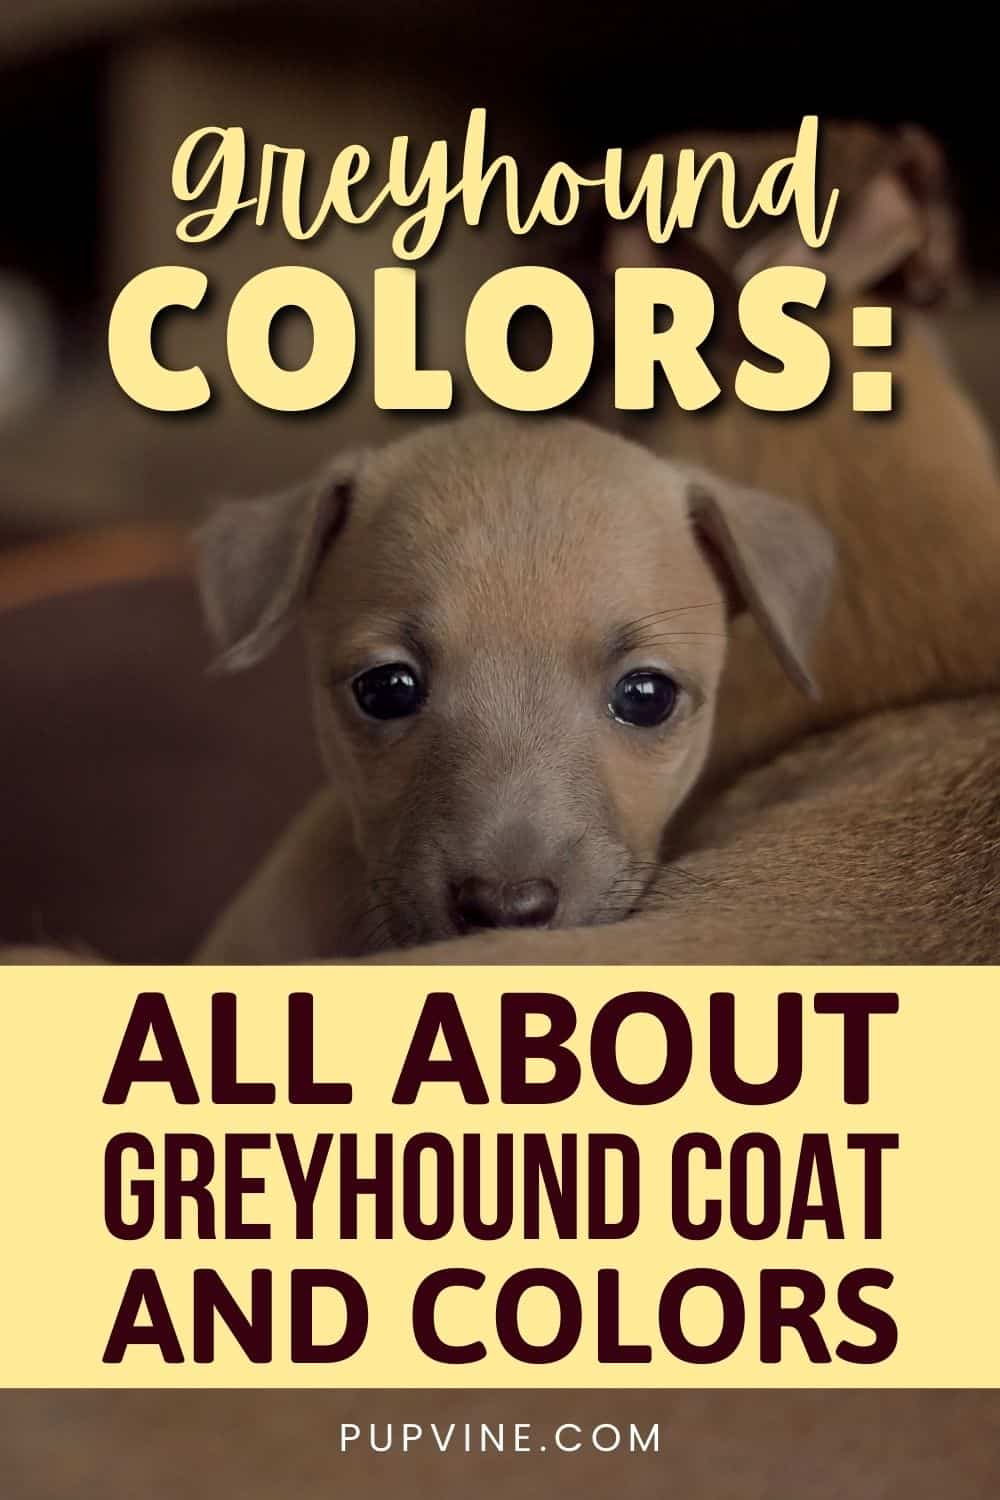 Greyhound Colors All About Greyhound Coat And Colors